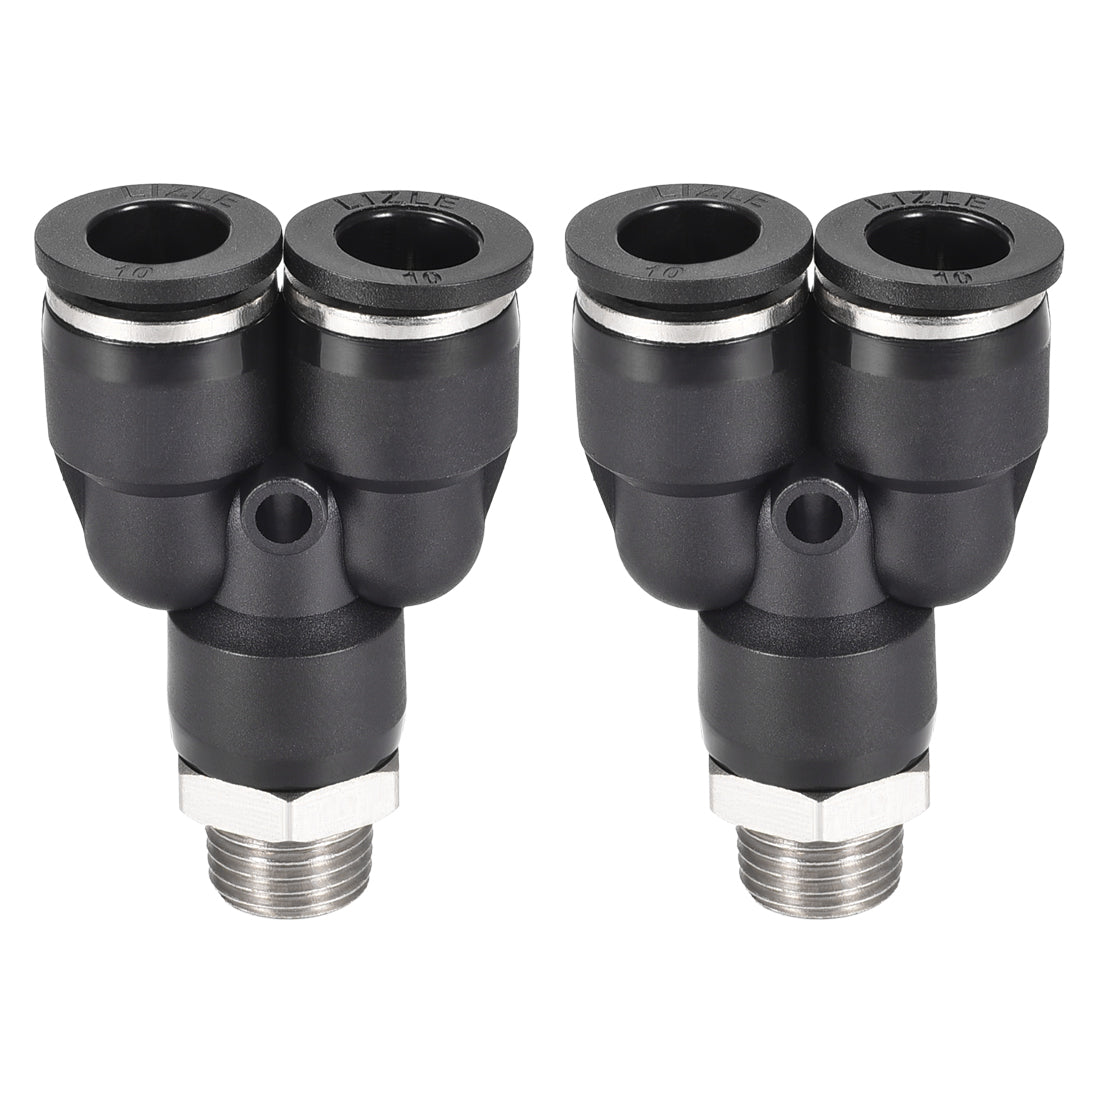 uxcell Uxcell Push To Connect Air Fittings Y Type Tube Connect 10mm OD x 1/4PT Male Thread Tube Fittings Push Lock Black 2Pcs